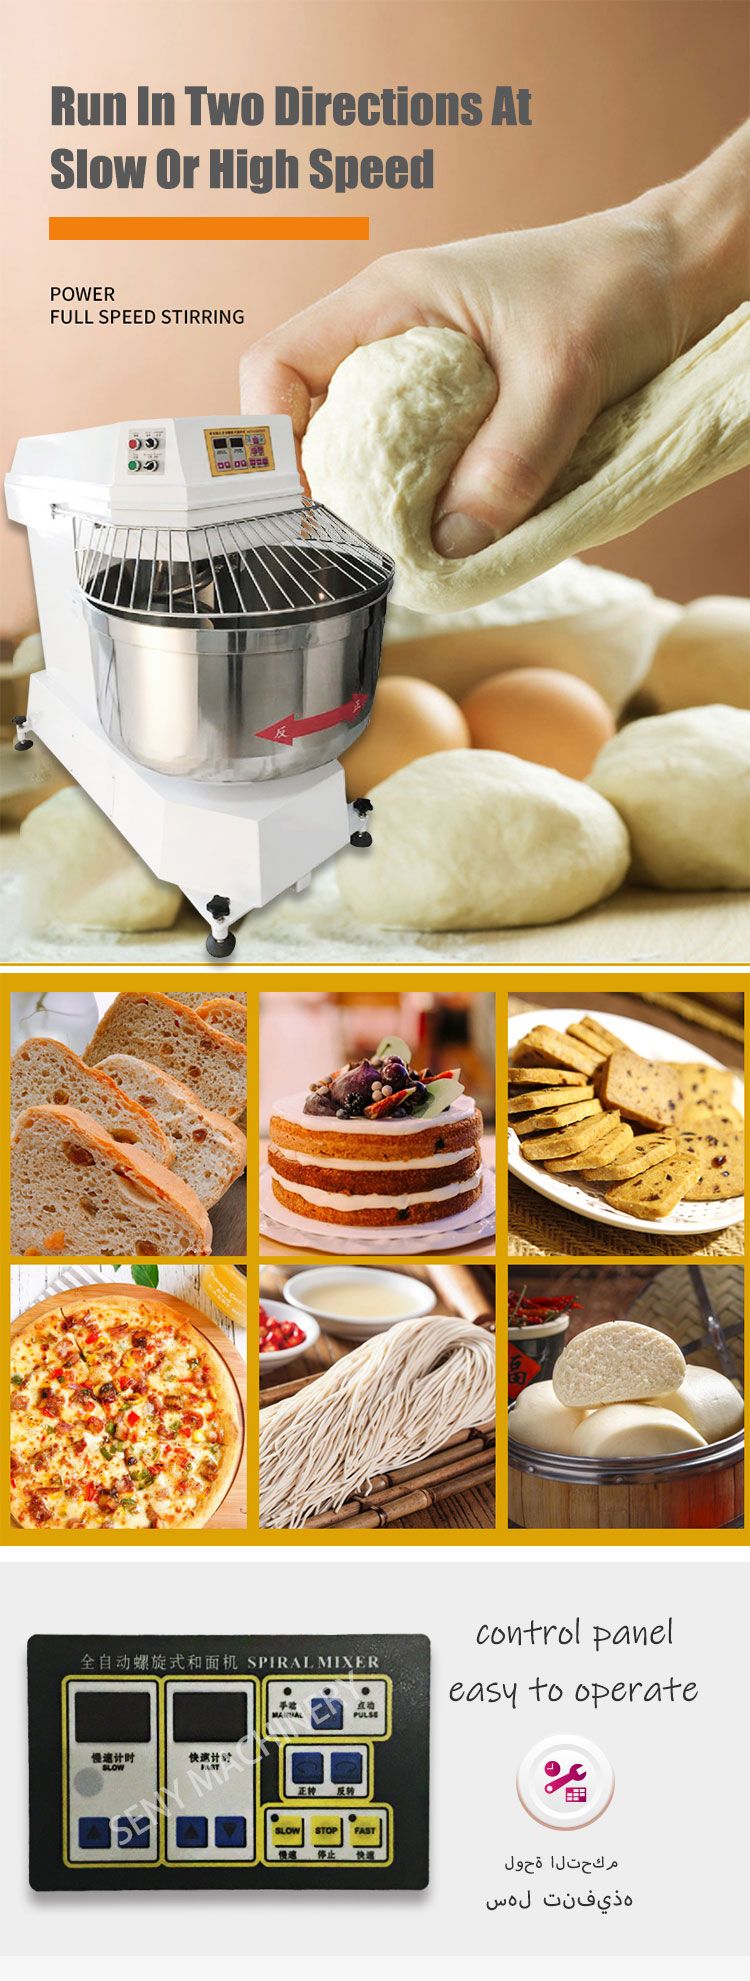 SY-301 Stainless Steel Stand Electric Spiral Dough Mixer Flour Mixer